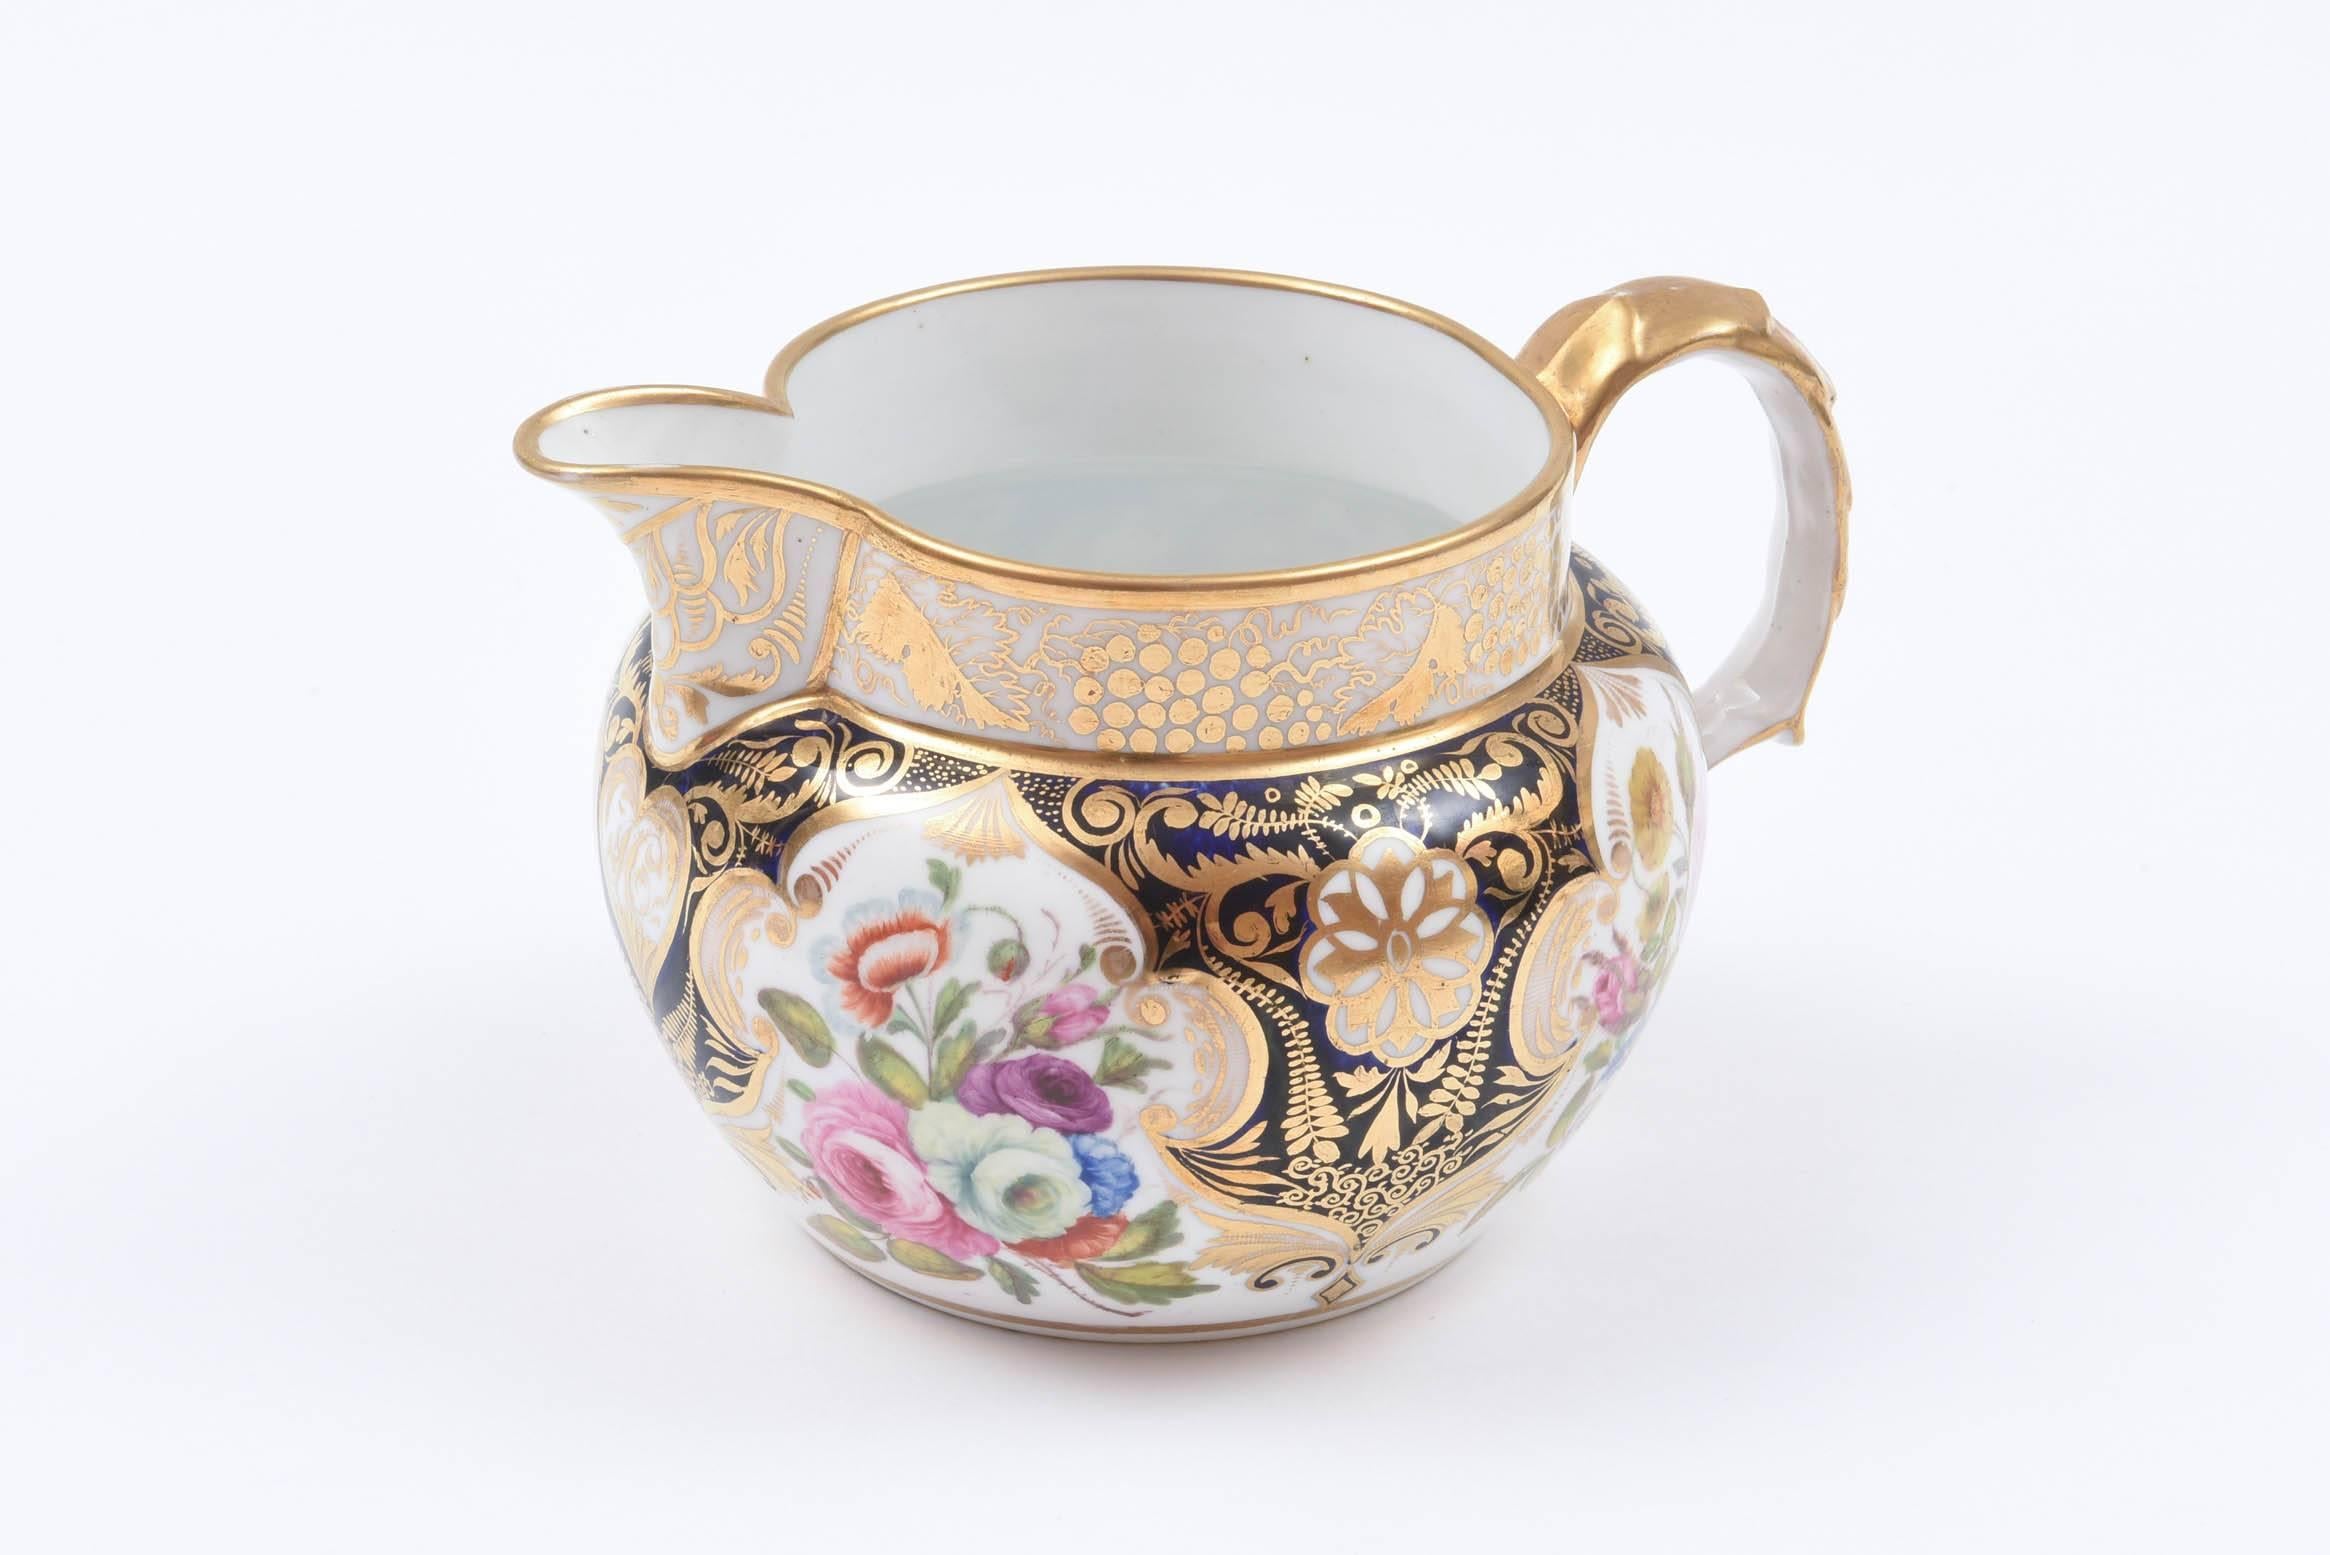 A darling piece of hand painted porcelain from one of the major factories of Coalport, Ridgway, featuring a museum deaccession mark. In wonderful antique condition, a generous size and ready for your collection!